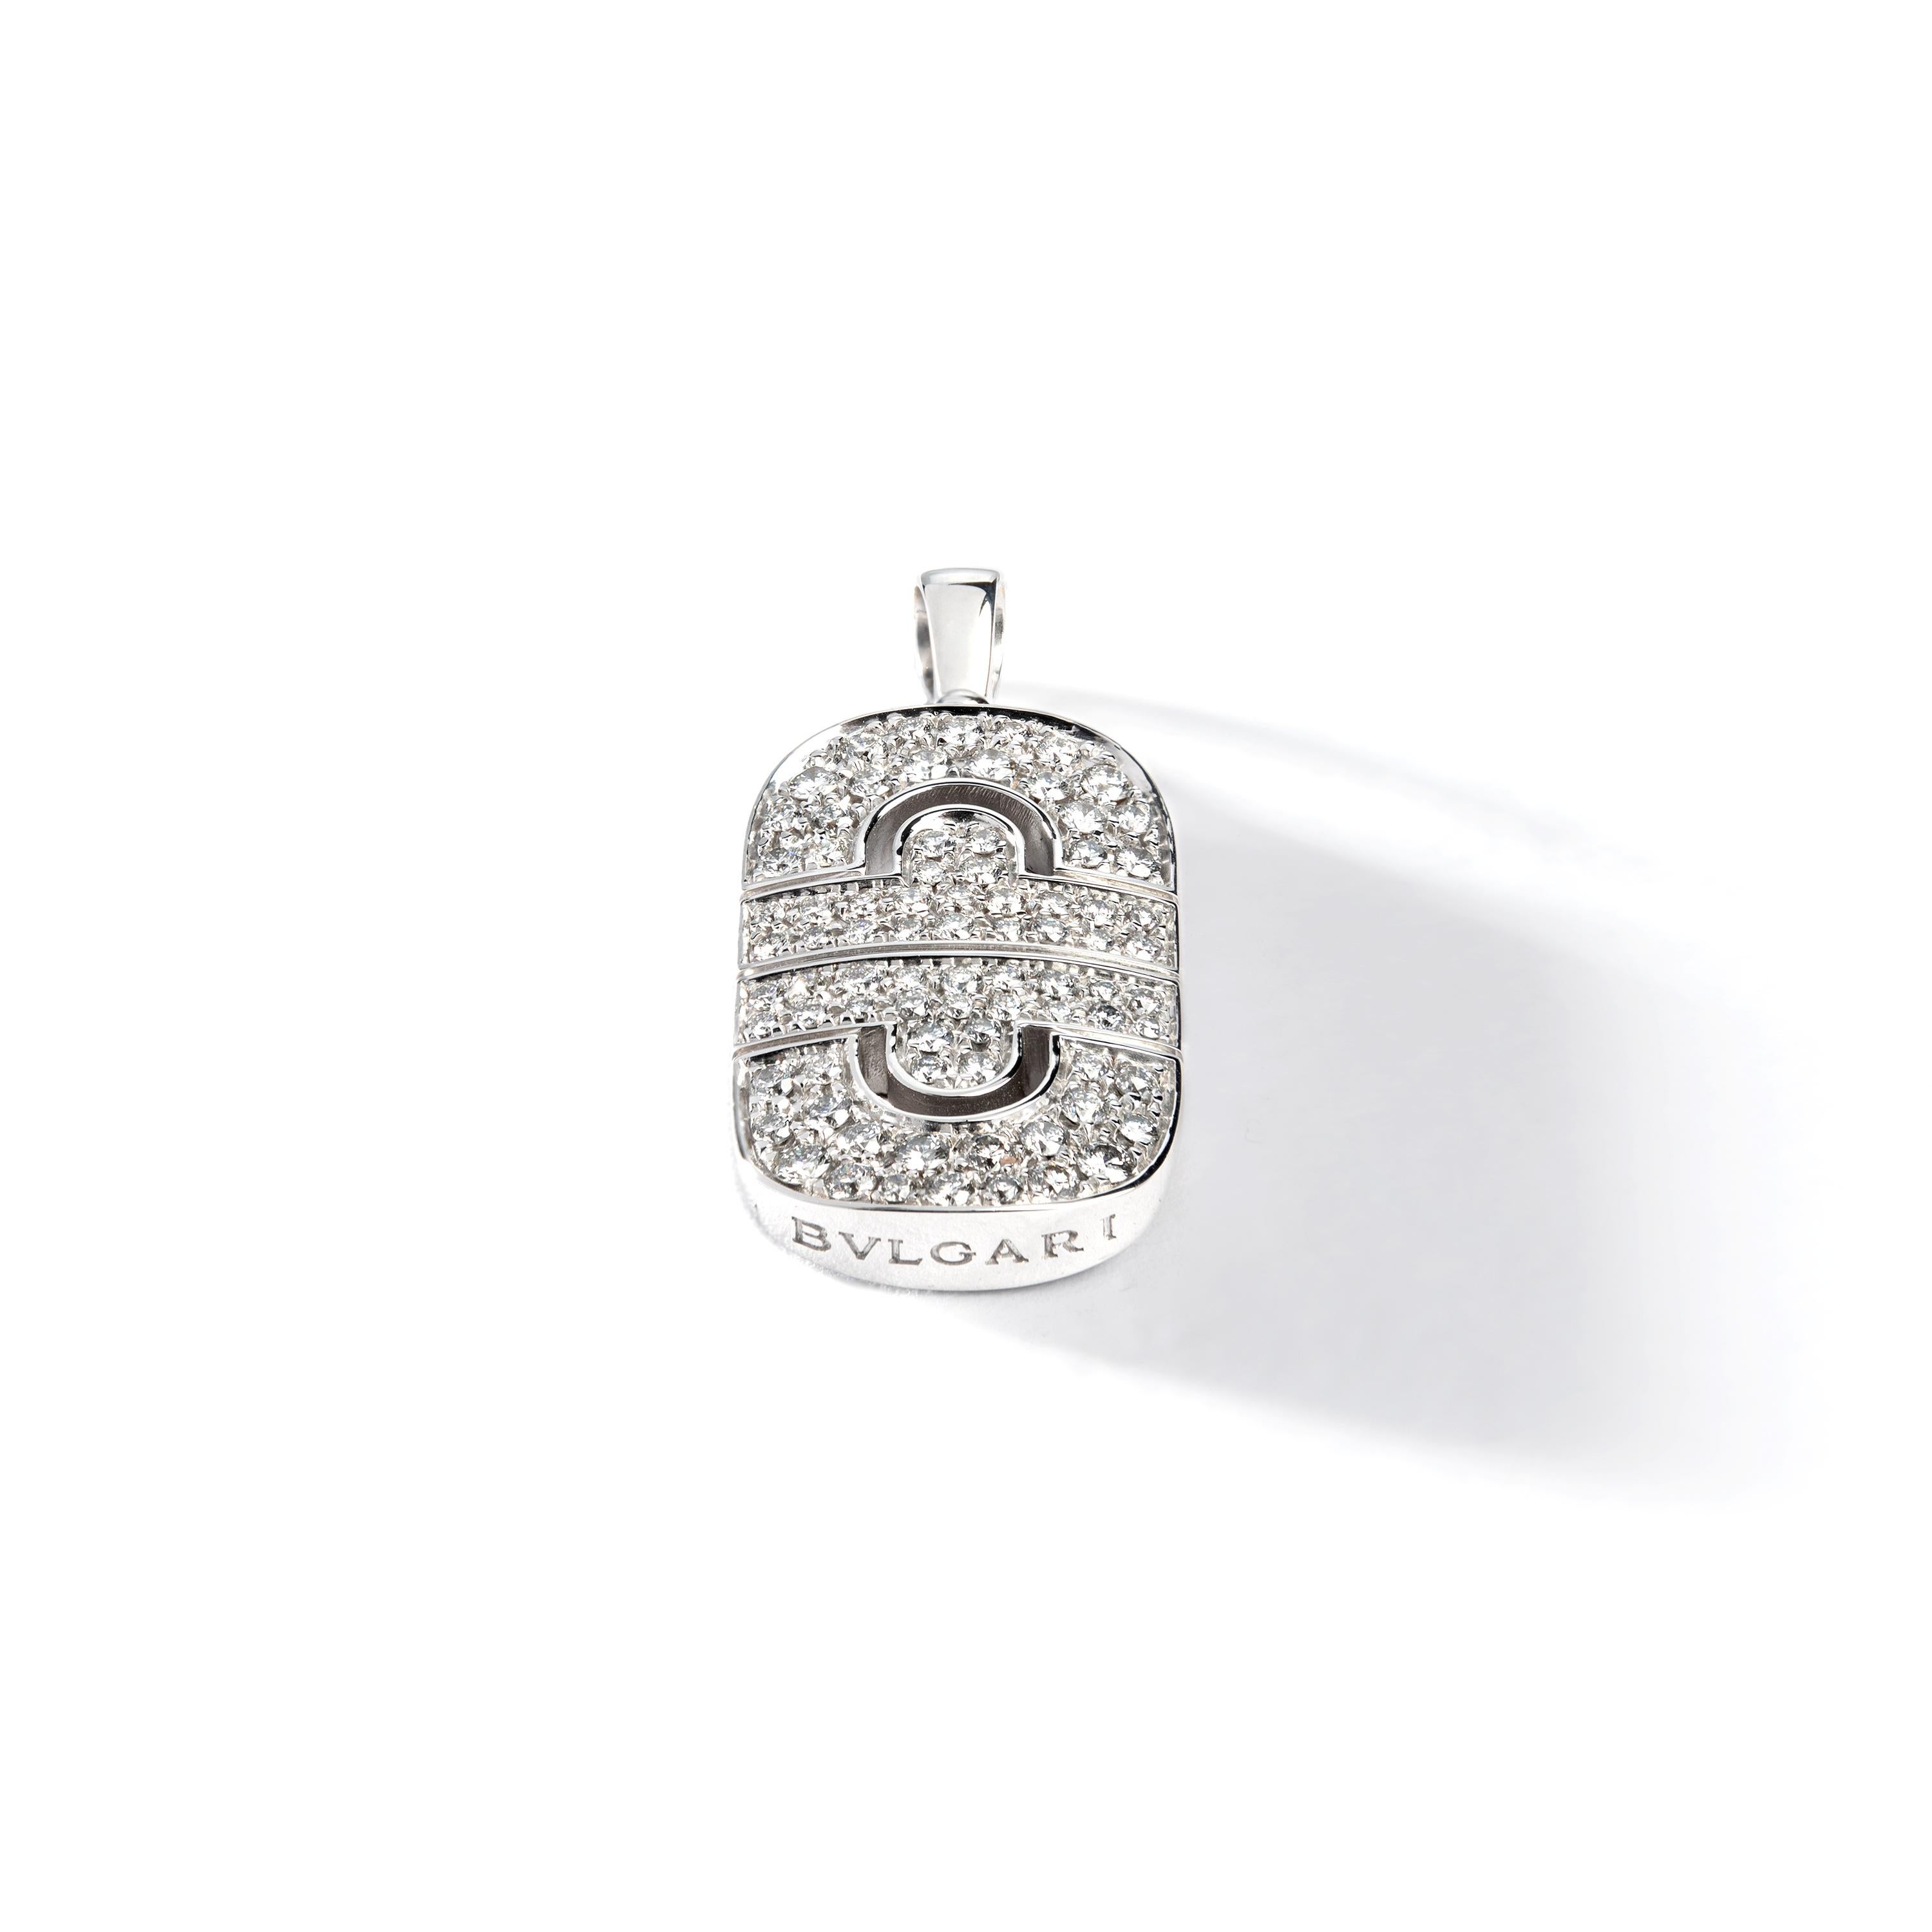 Crafted in 18K white gold. Polished as new.
Set with round brilliant-cut diamonds weighing a total of approximately 0.84 carat, most with G-H color and VS clarity.

Dimensions: 1.38 inch x 0.59 inch.
3.50 x 1.50 centimeters. 

Matching earrings